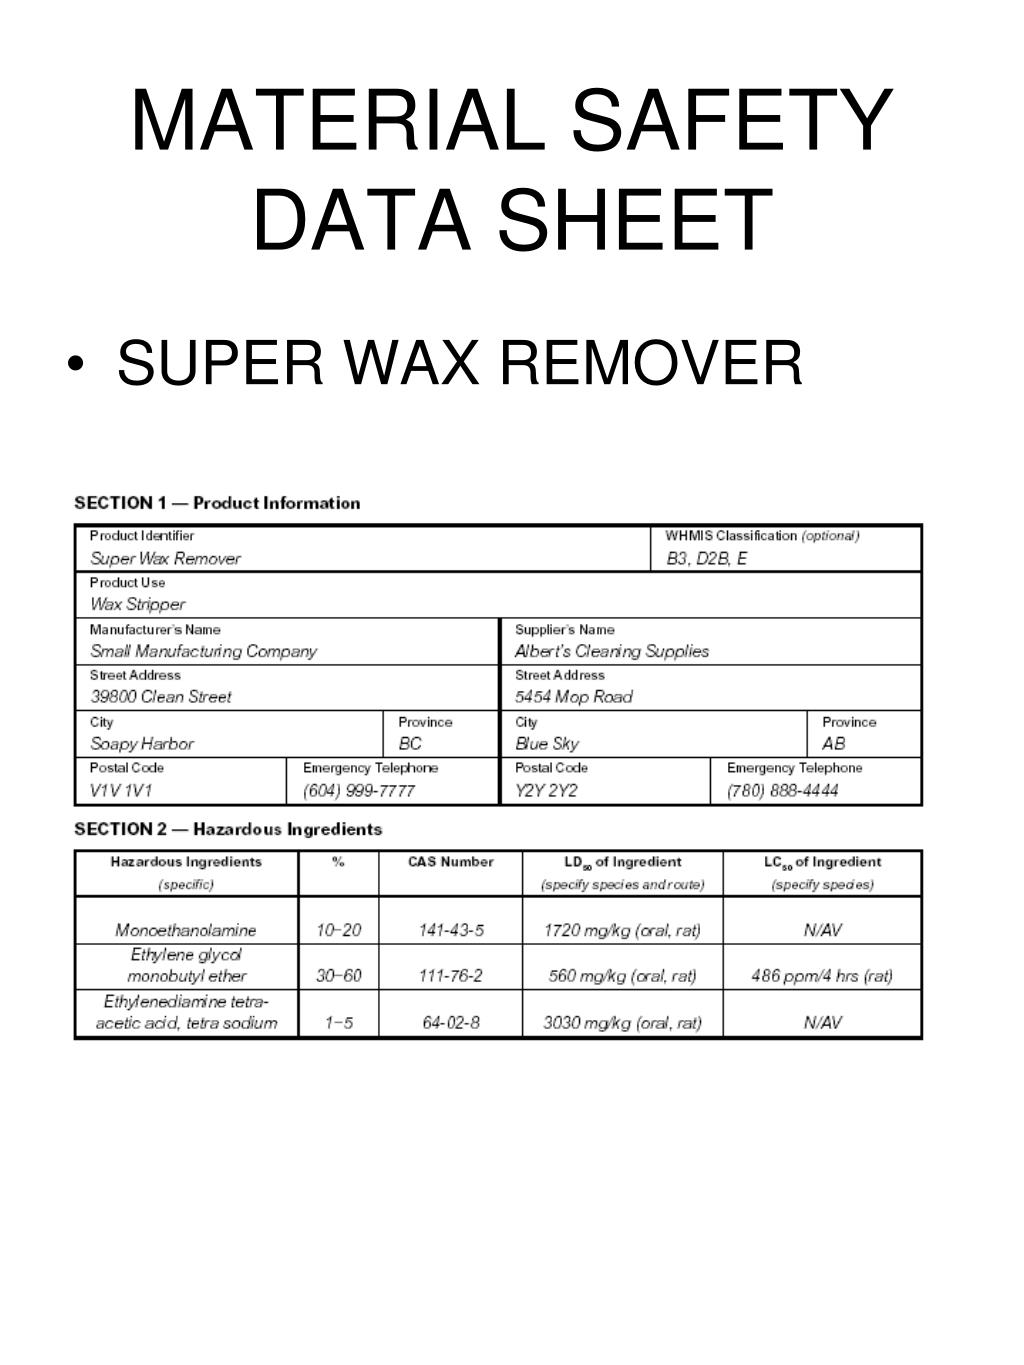 Material Safety Data Sheet Powerpoint Presentation : PPT - MSDS Material Safety Data Sheets PowerPoint ... : Compensation appeals involving neurotoxic chemical exposures.